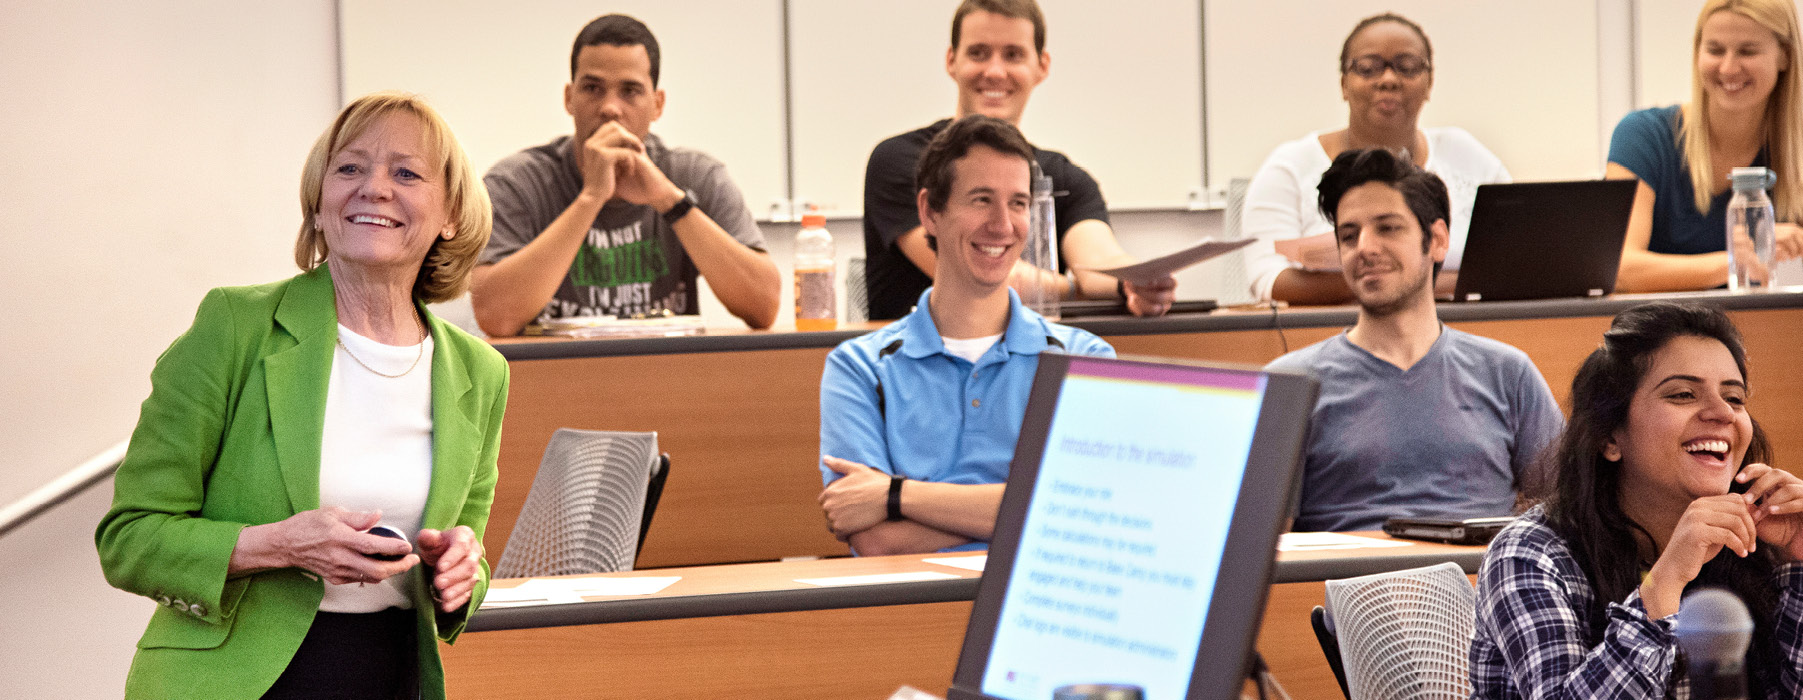 professor smiling along with the students in her classroom